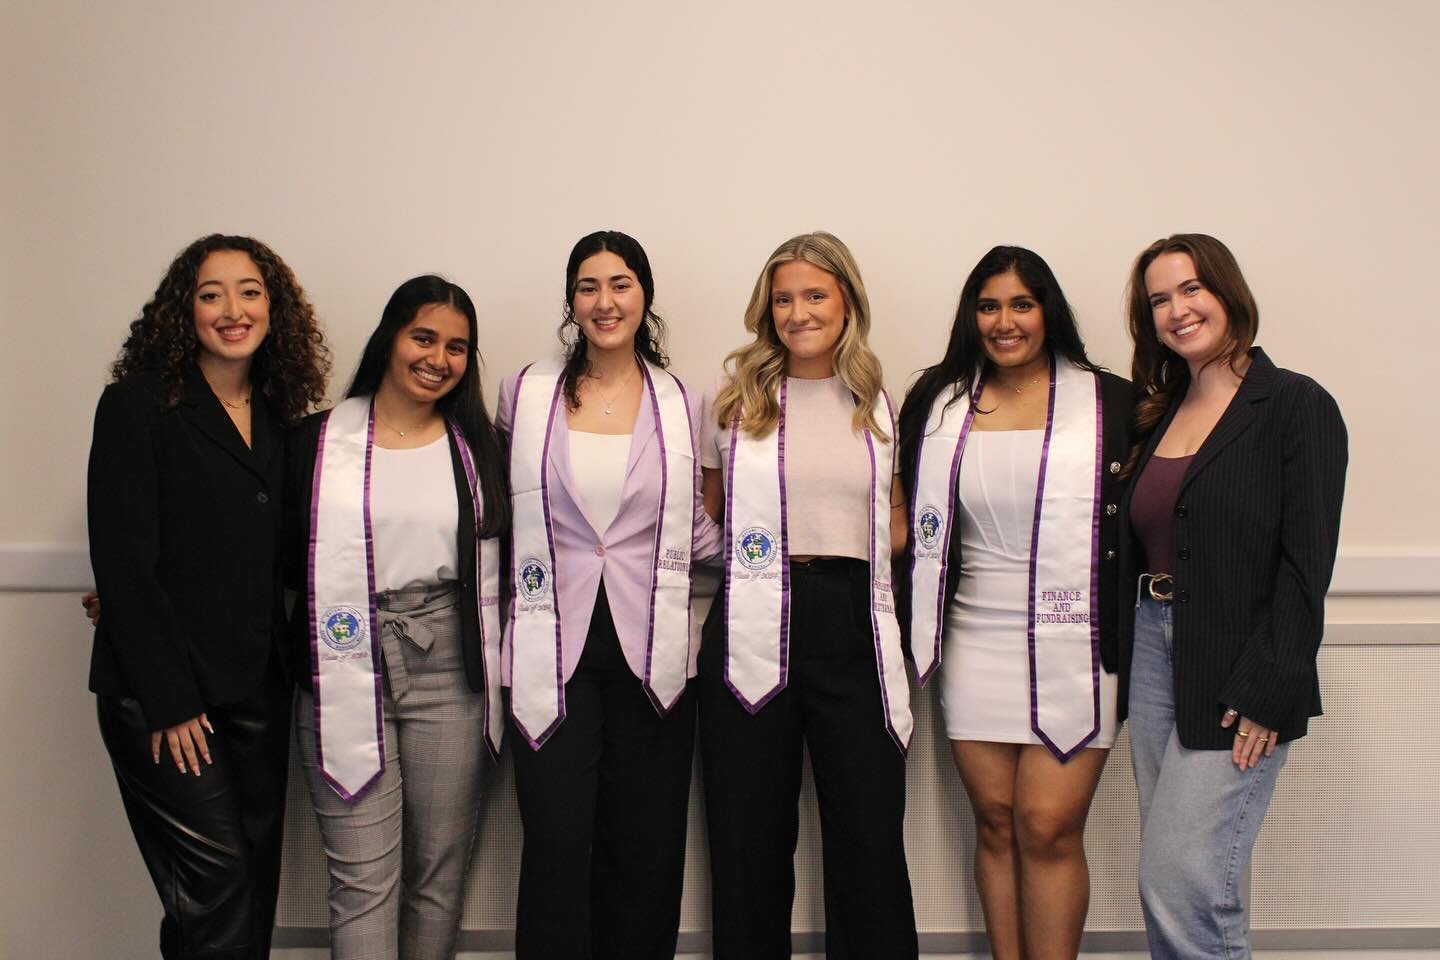 Thank you to everyone who was able to come out to our final GBM of the spring 2024 semester and school year! It sure was an emotional one as we bid farewell to our 2023-2024 executive board, and welcomed our new board! We also recapped memorable mome